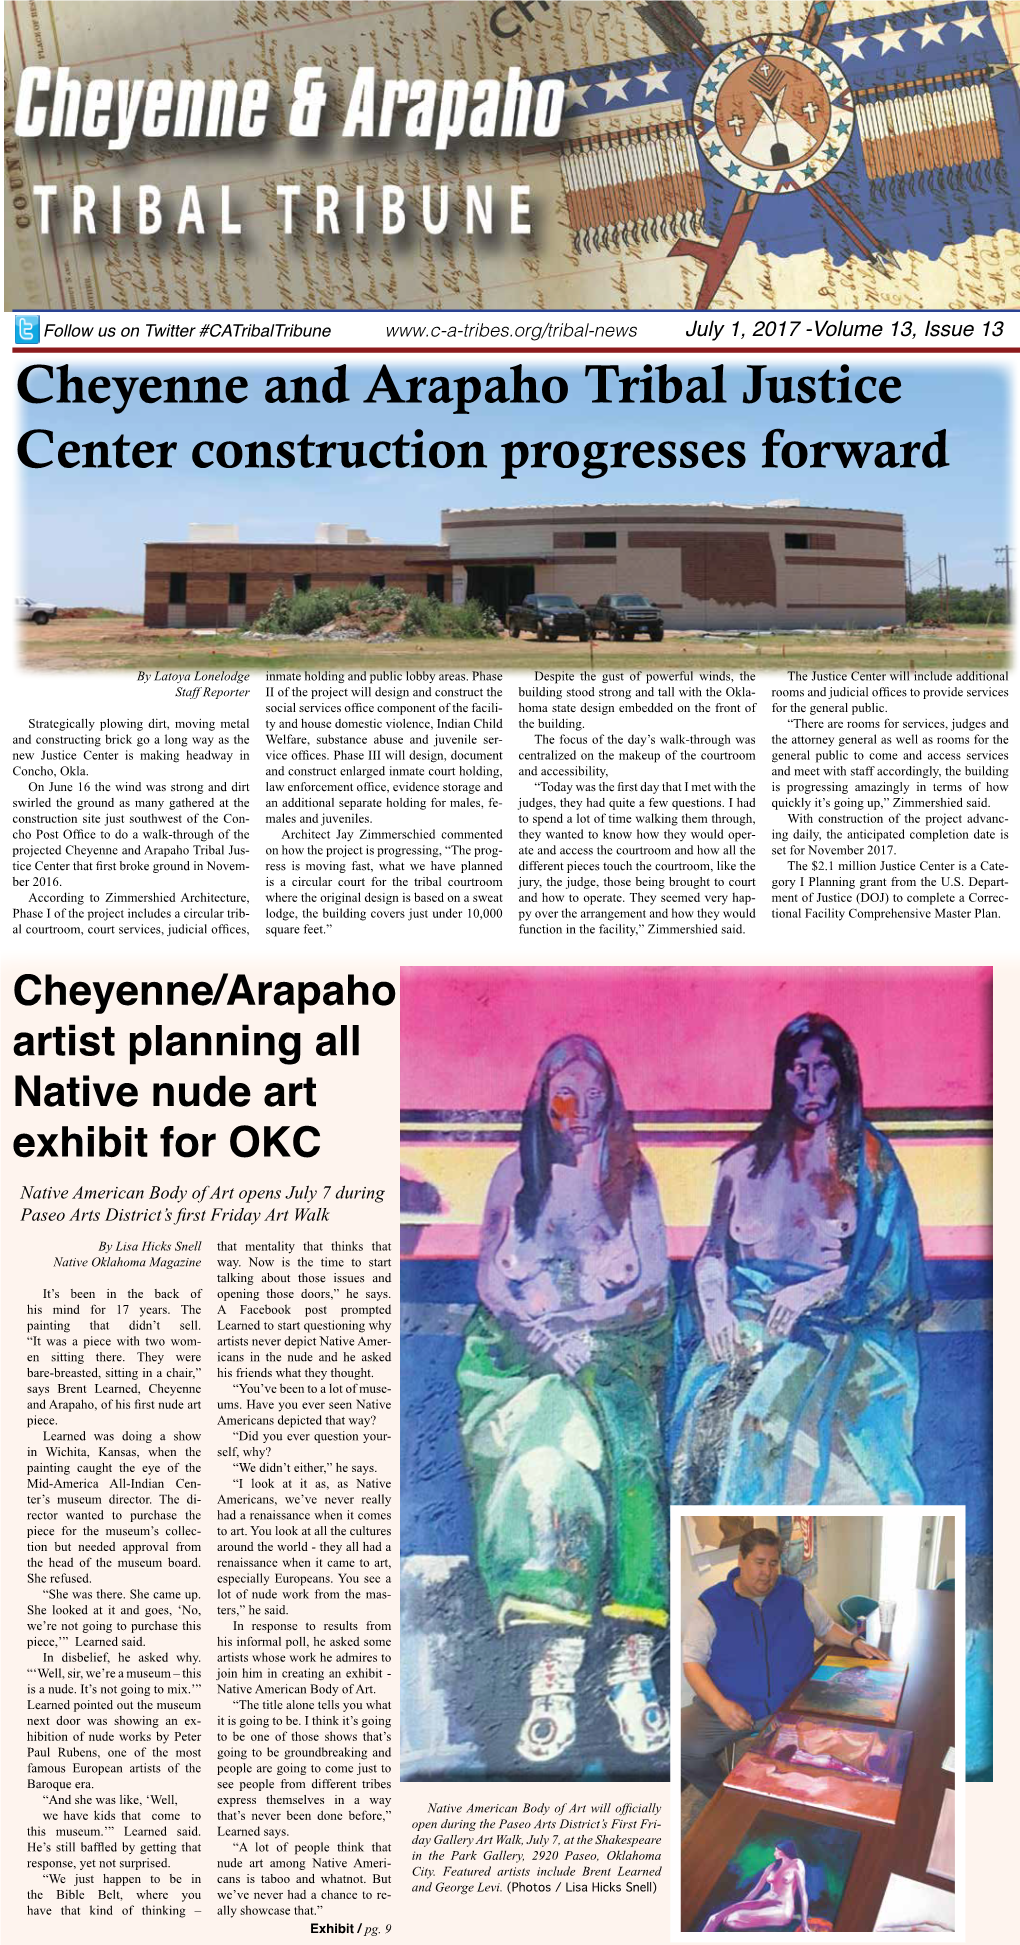 Cheyenne and Arapaho Tribal Justice Center Construction Progresses Forward